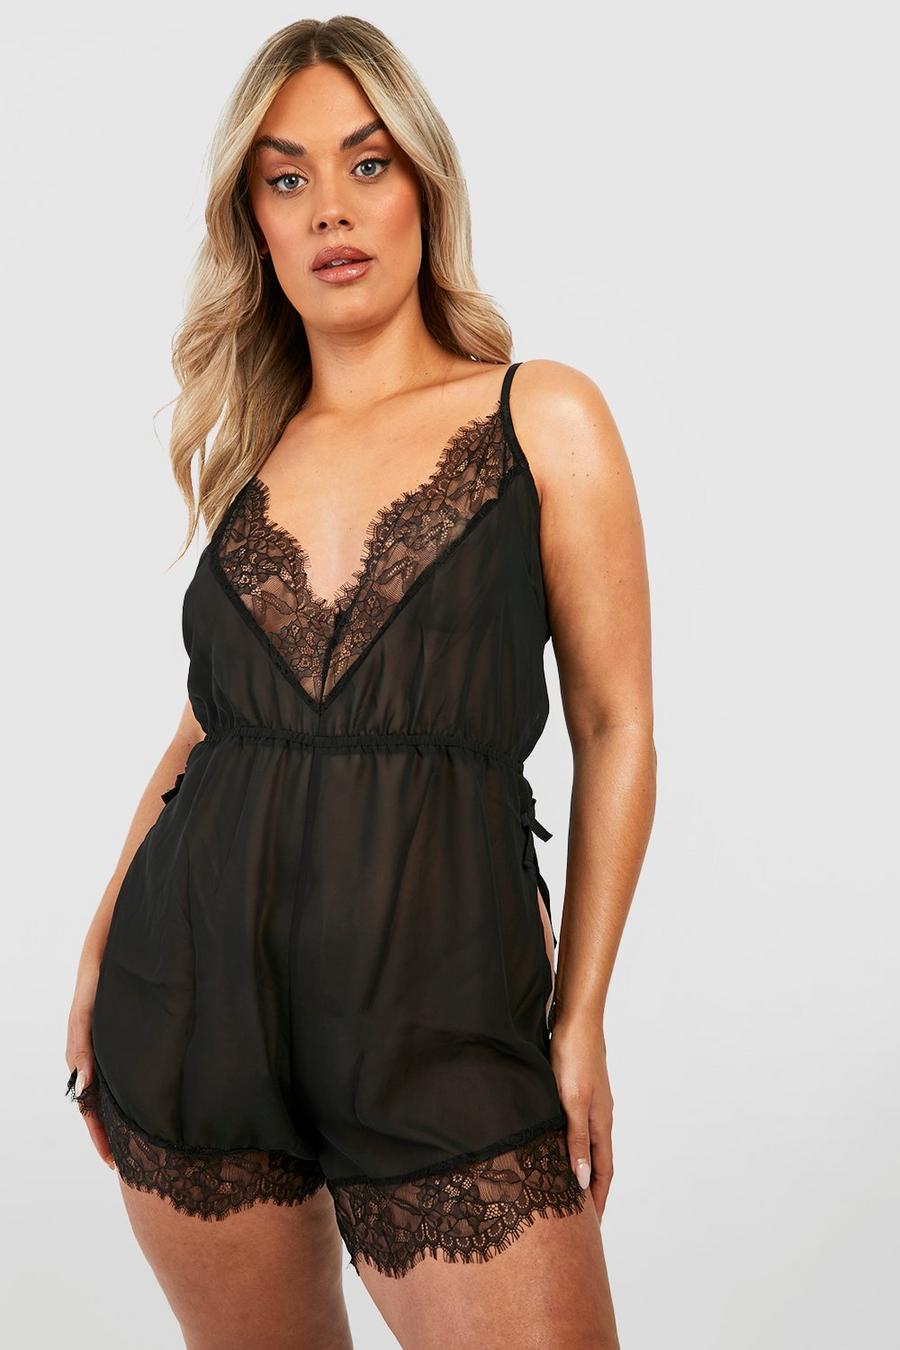 Lingerie Plus Size Black Baby Doll Lovely Lacy Lady - $16.00